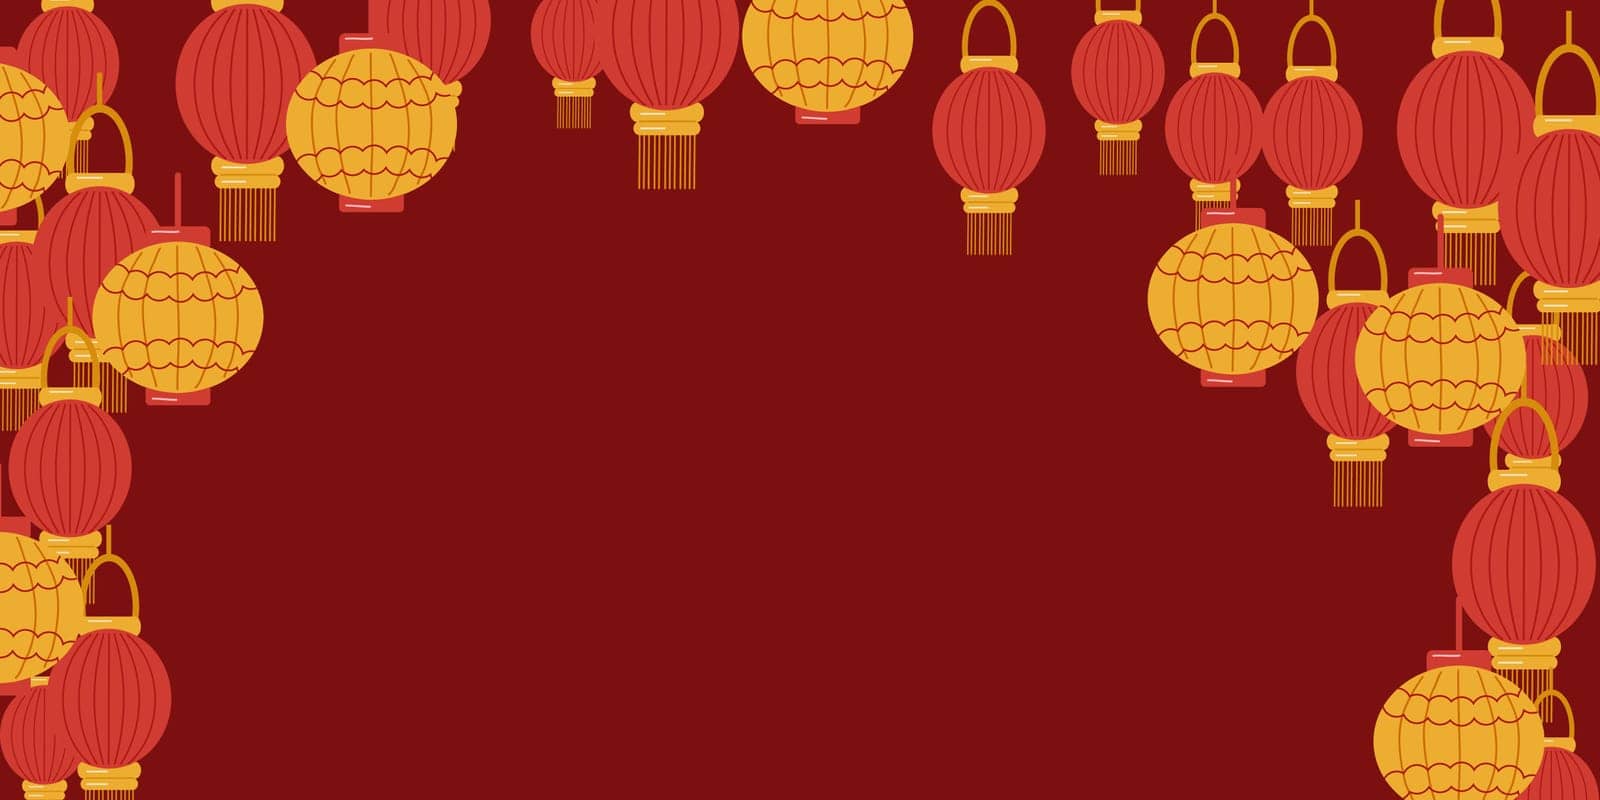 Background of Chinese lanterns. Yellow and red lanterns on a red background. Chinese New Year. Design website, banner, poster. Color vector illustration.